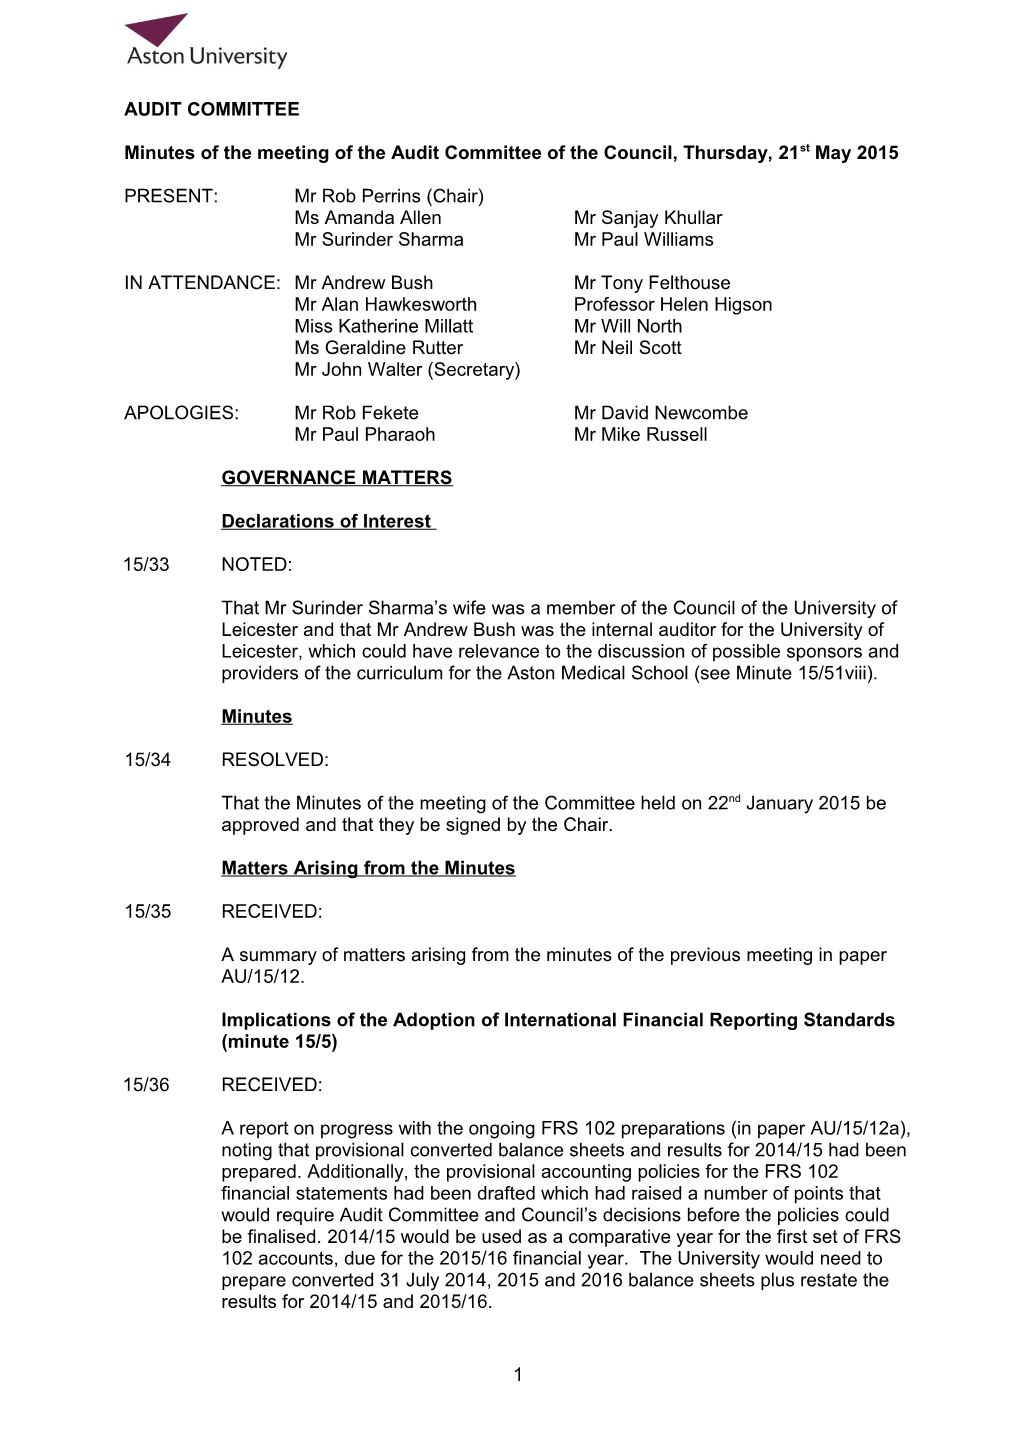 Minutes of the Meeting of the Audit Committee of the Council, Thursday, 21St May 2015